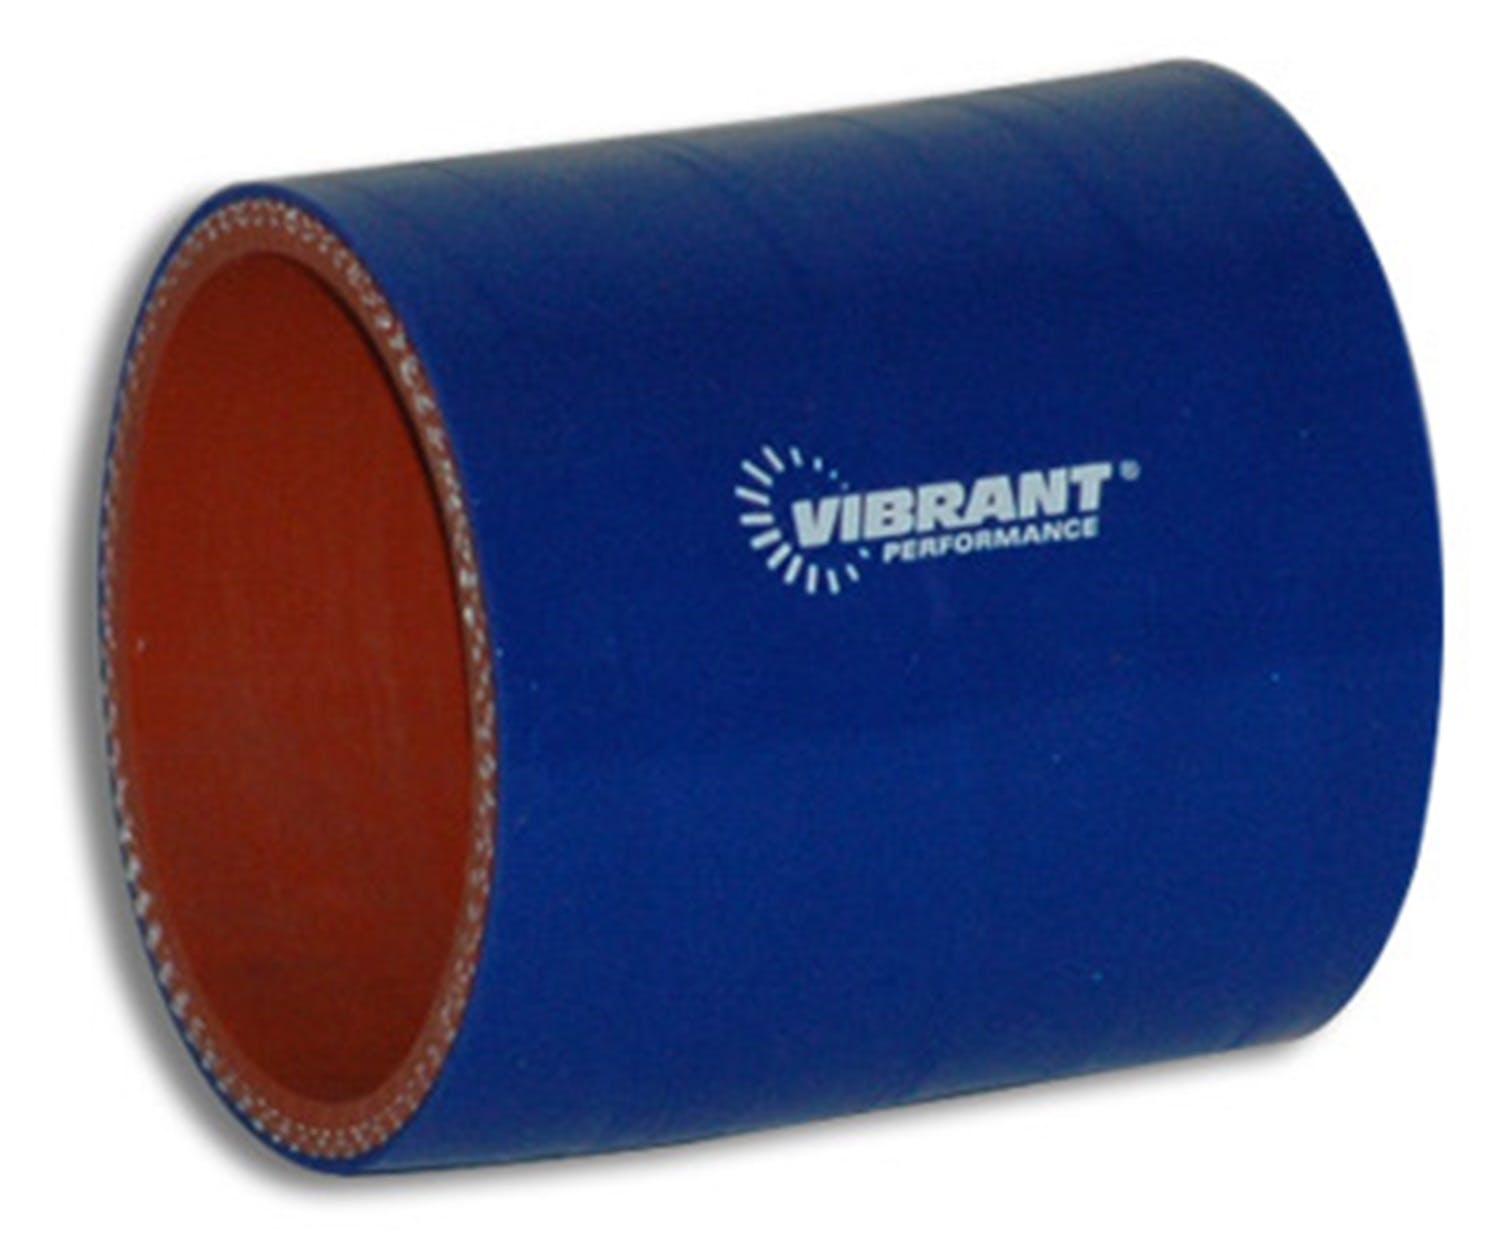 Vibrant Performance 2700B 4 Ply Silicone Sleeve, 1 inch I.D. x 3 inch Long - Blue